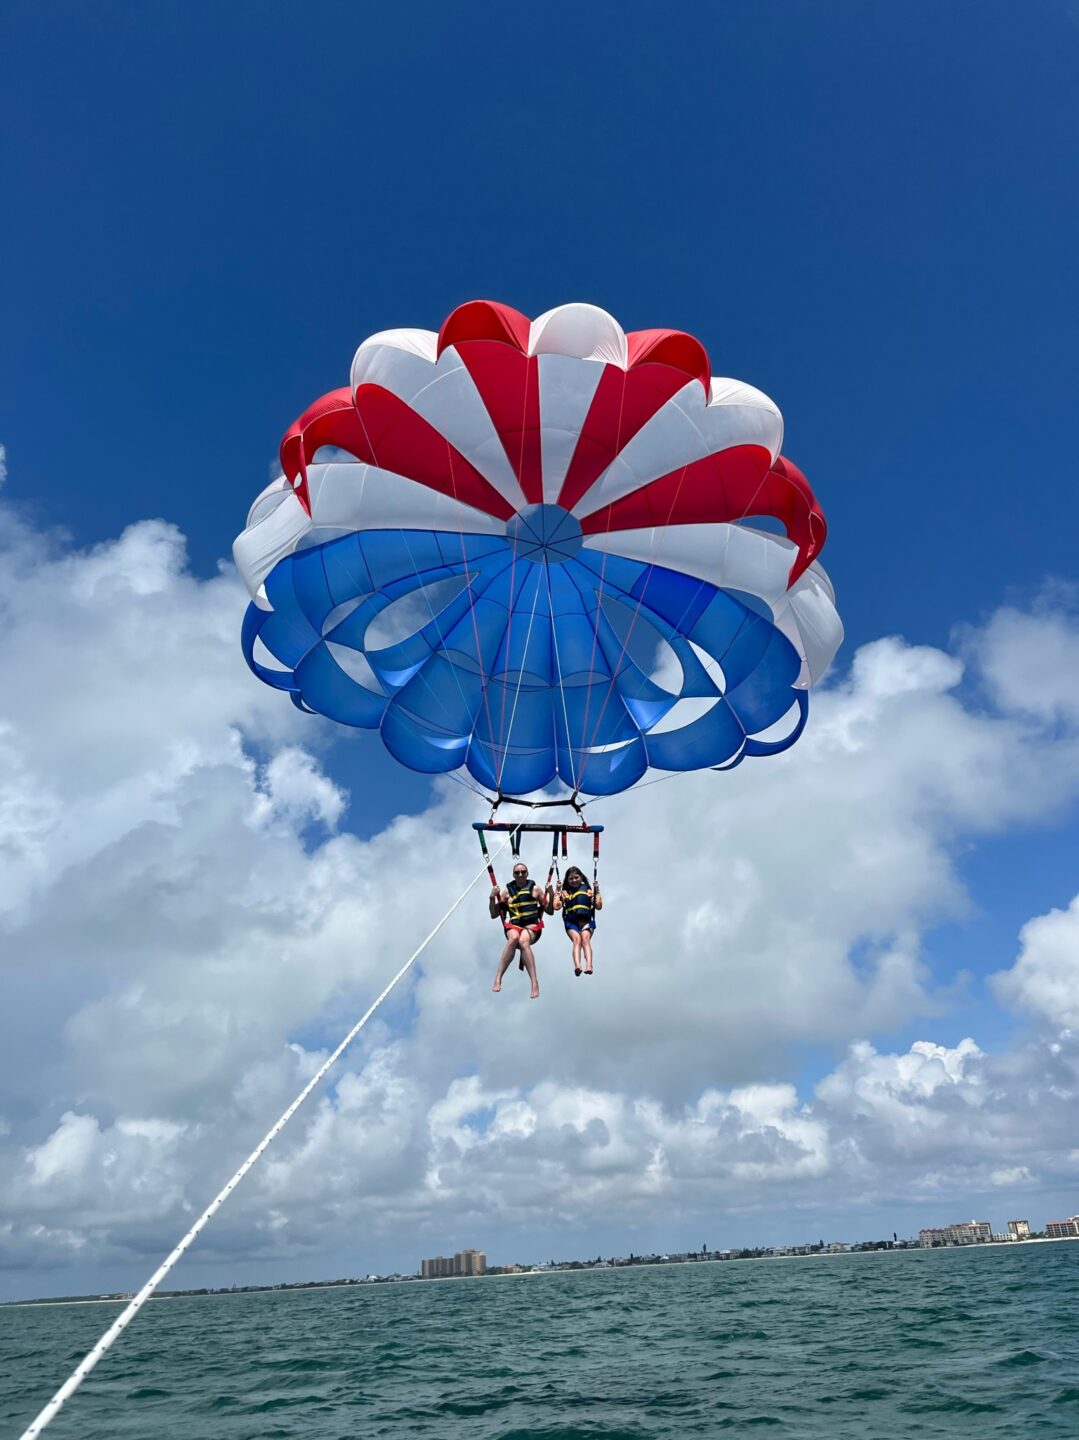 Parasailing at Clearwater Beach